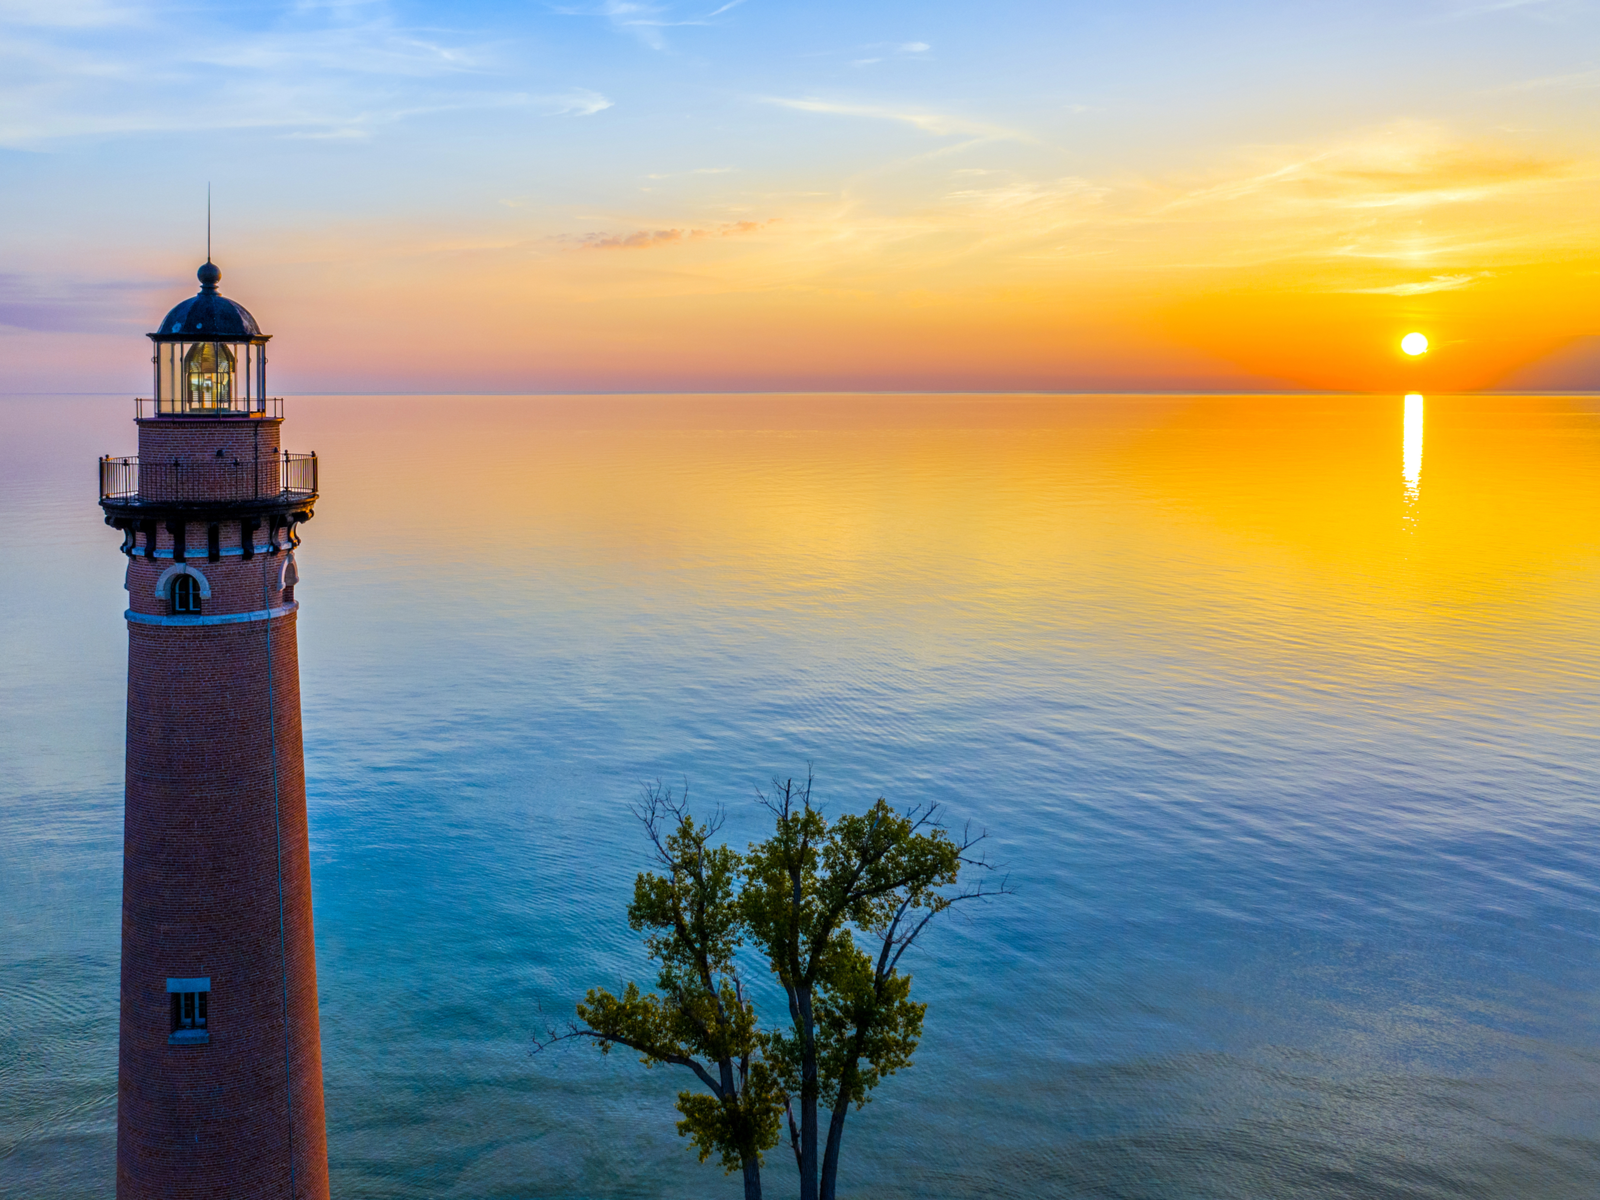 Crimson sunset over Little Sable Point Lighthouse at tranquil Lake Michigan, known as one of the best lakes in the U.S.